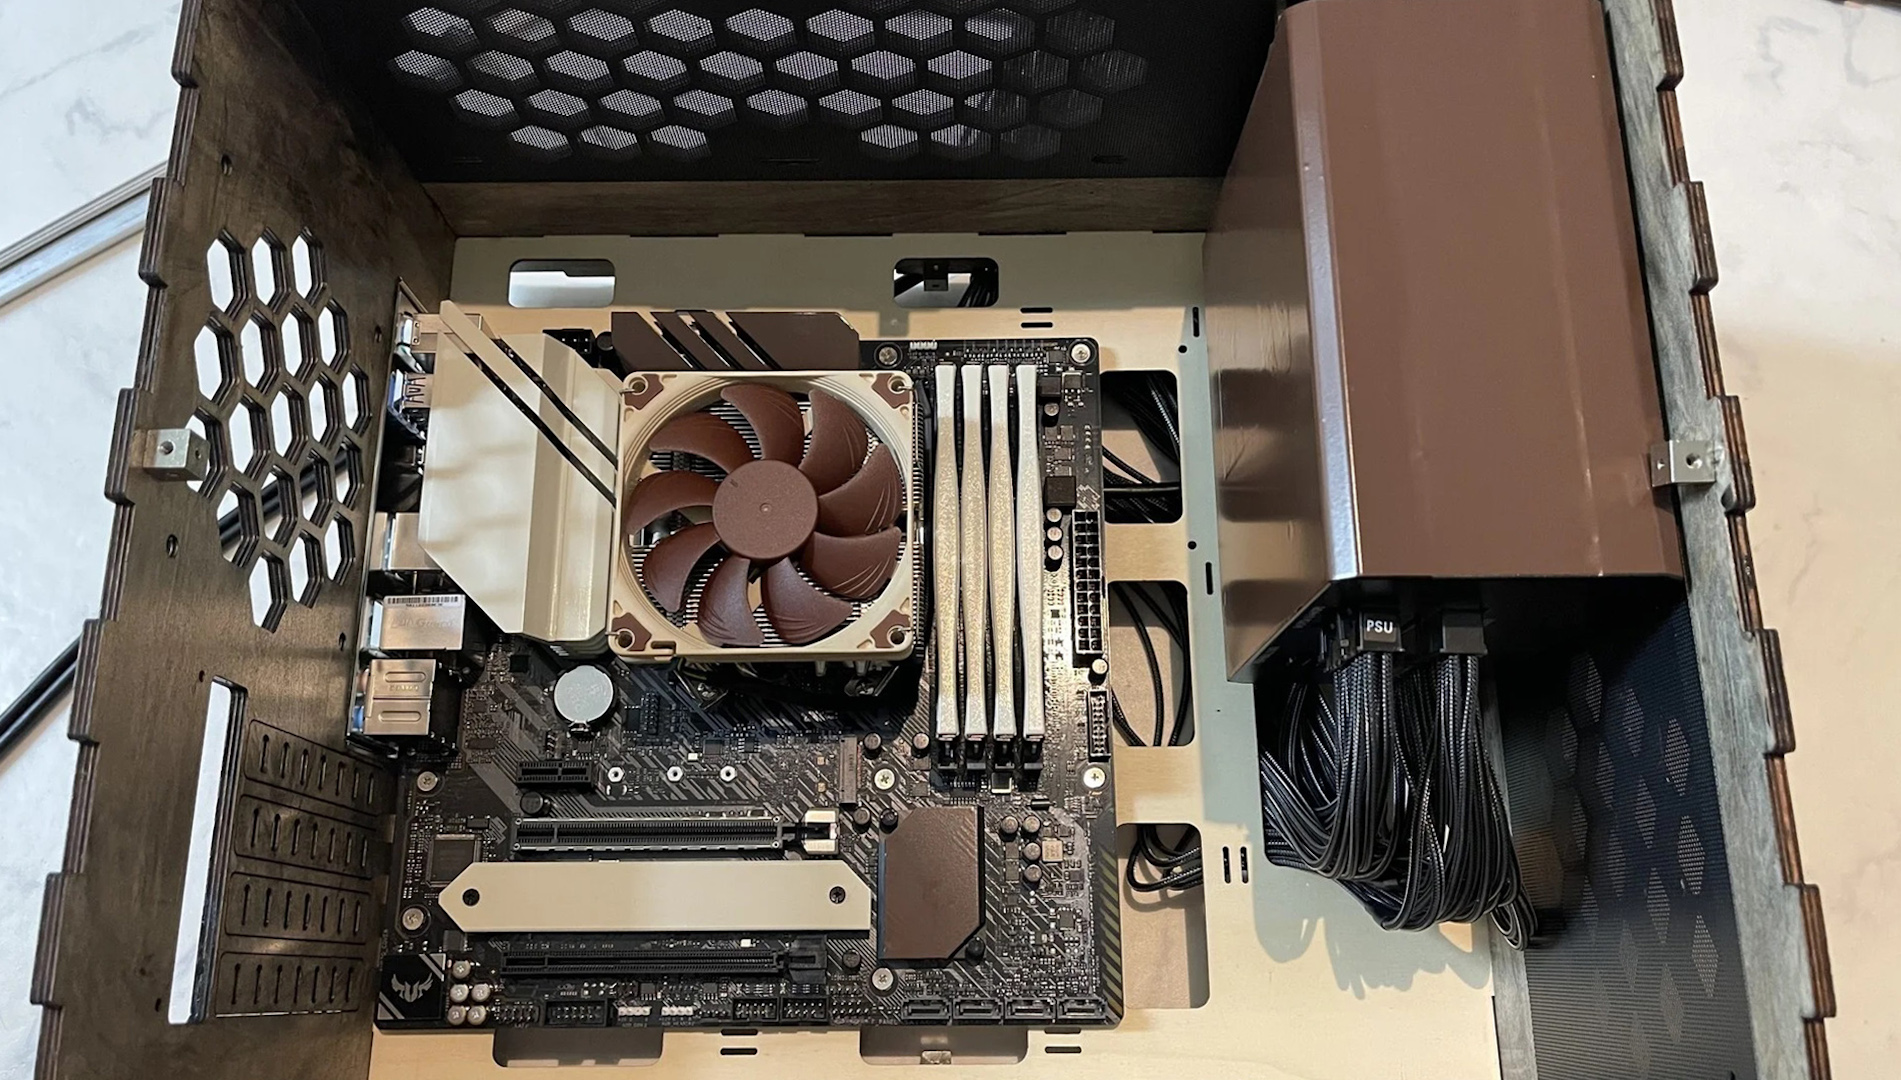 The inside of the wooden Noctua gaming PC with painted motherboard and PSU shroud